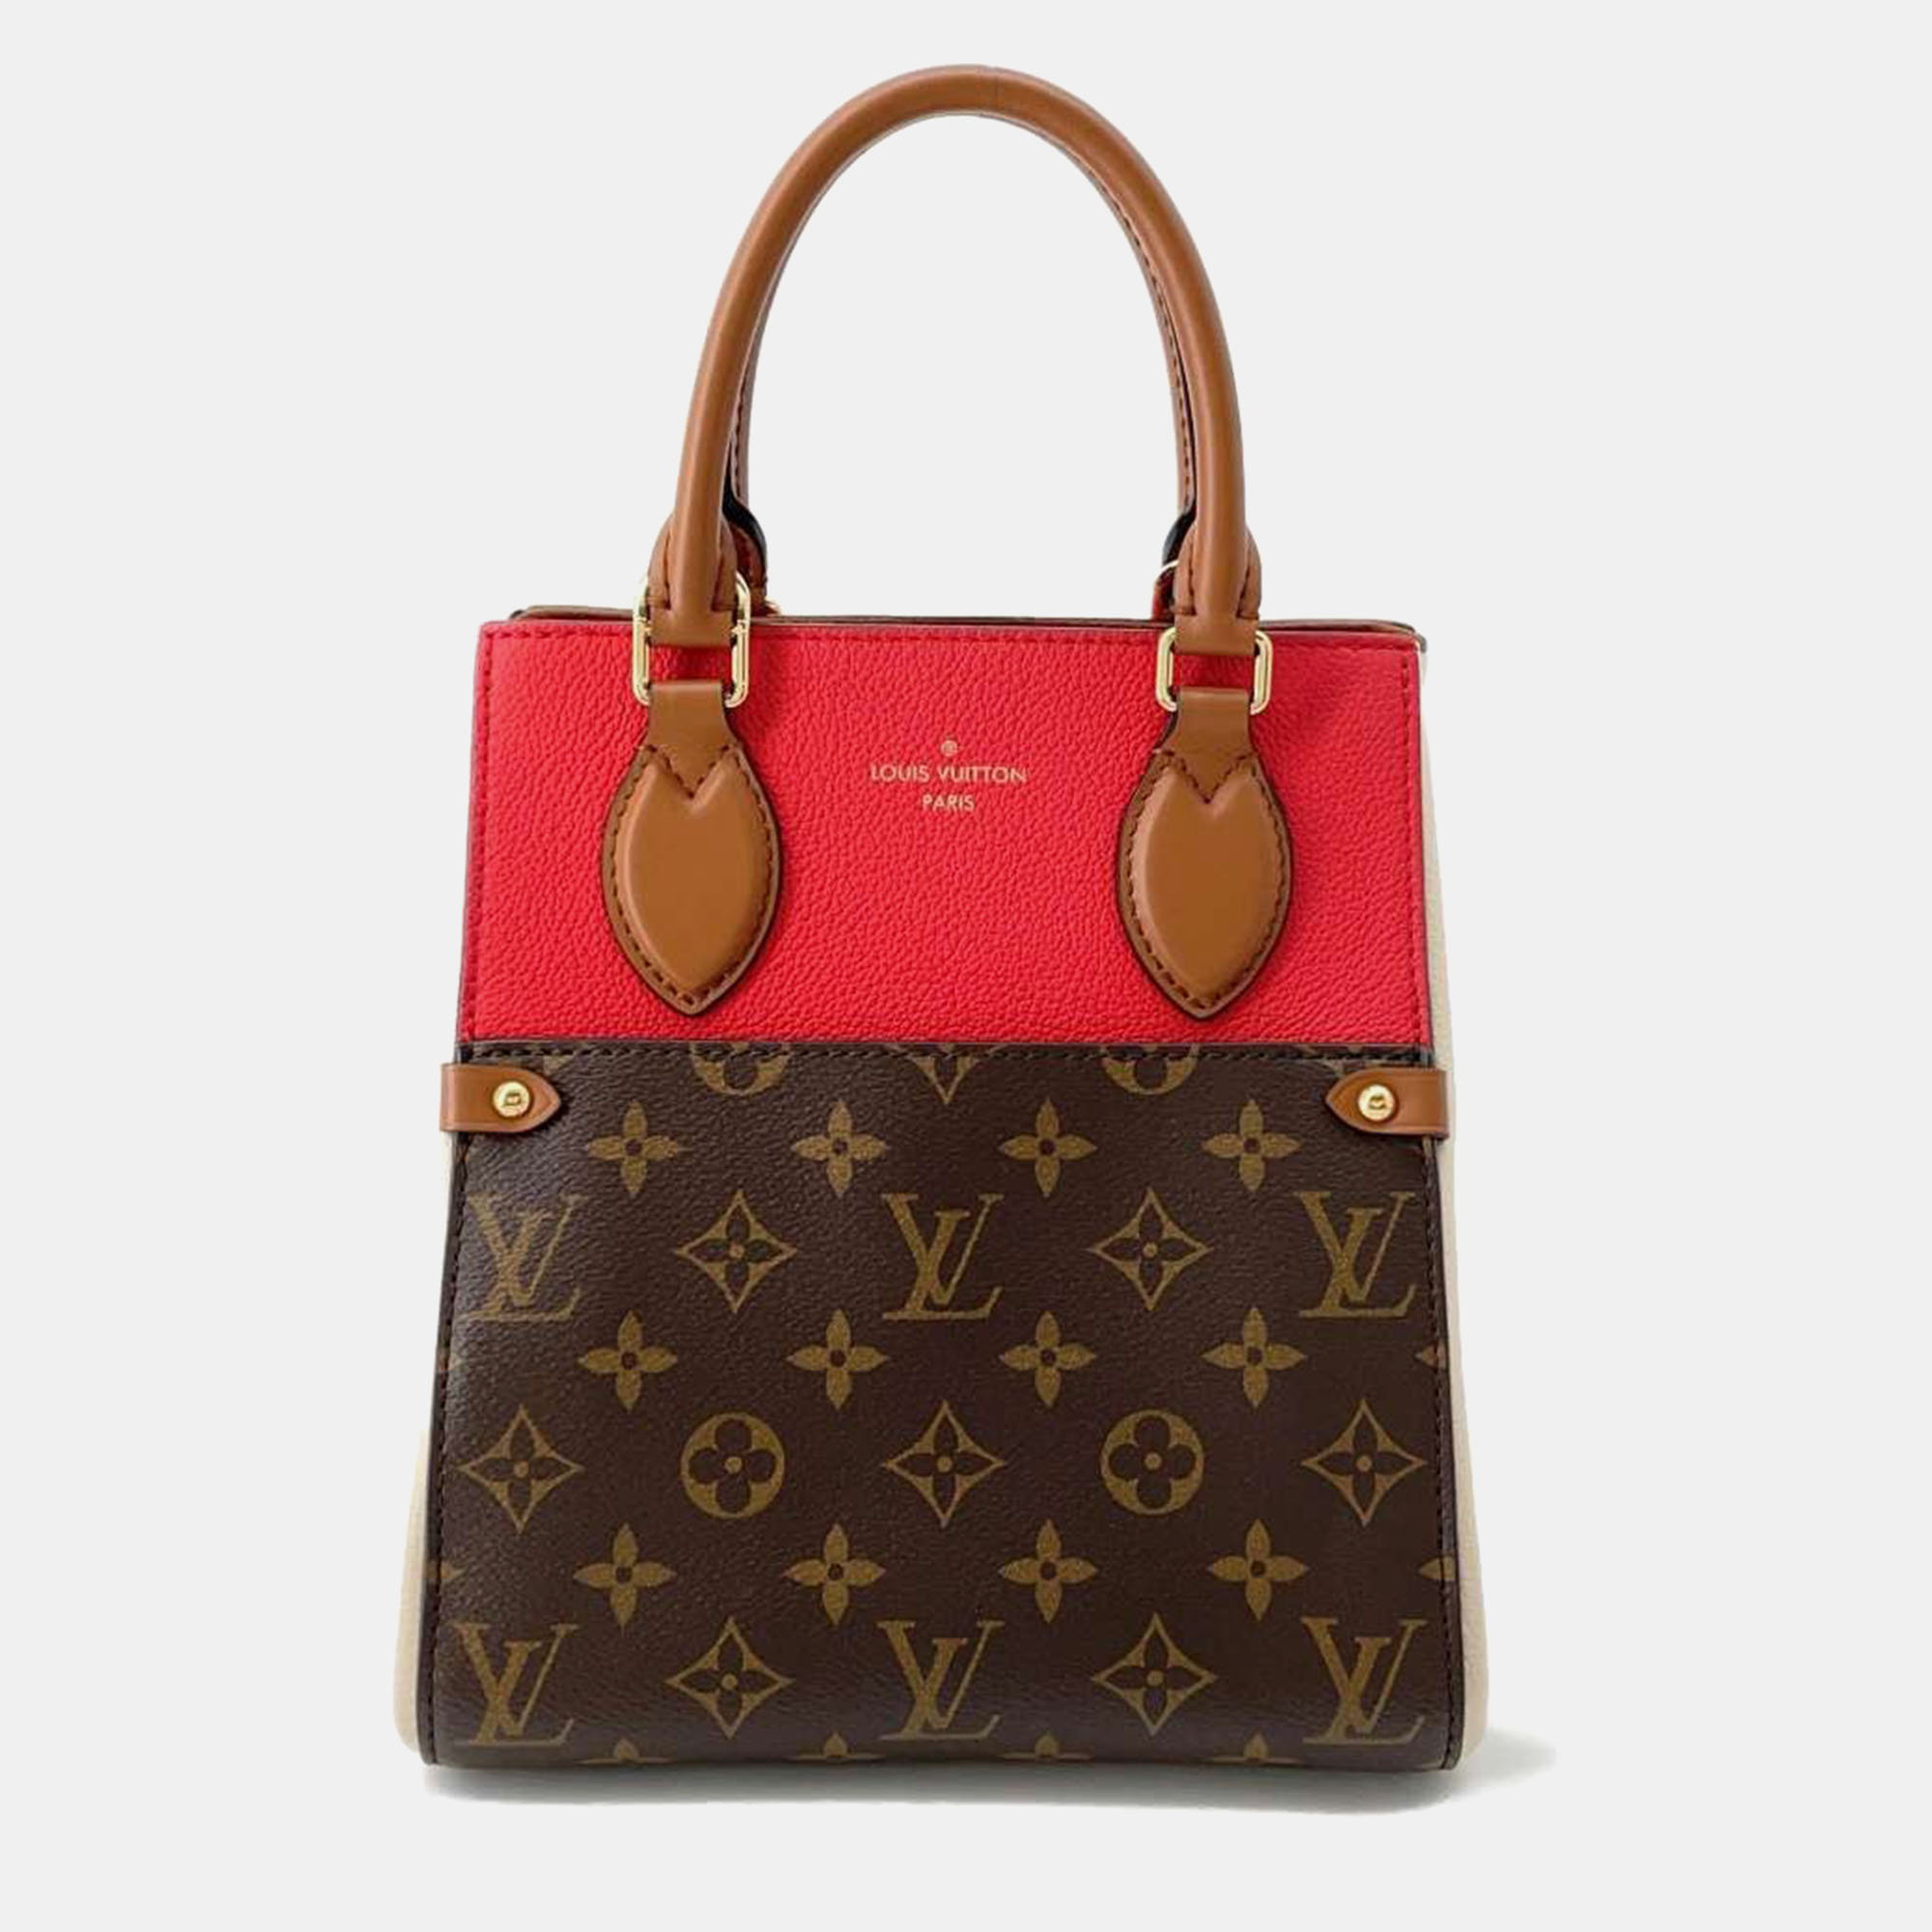 Louis vuitton red/monogram leather fold tote pm bag